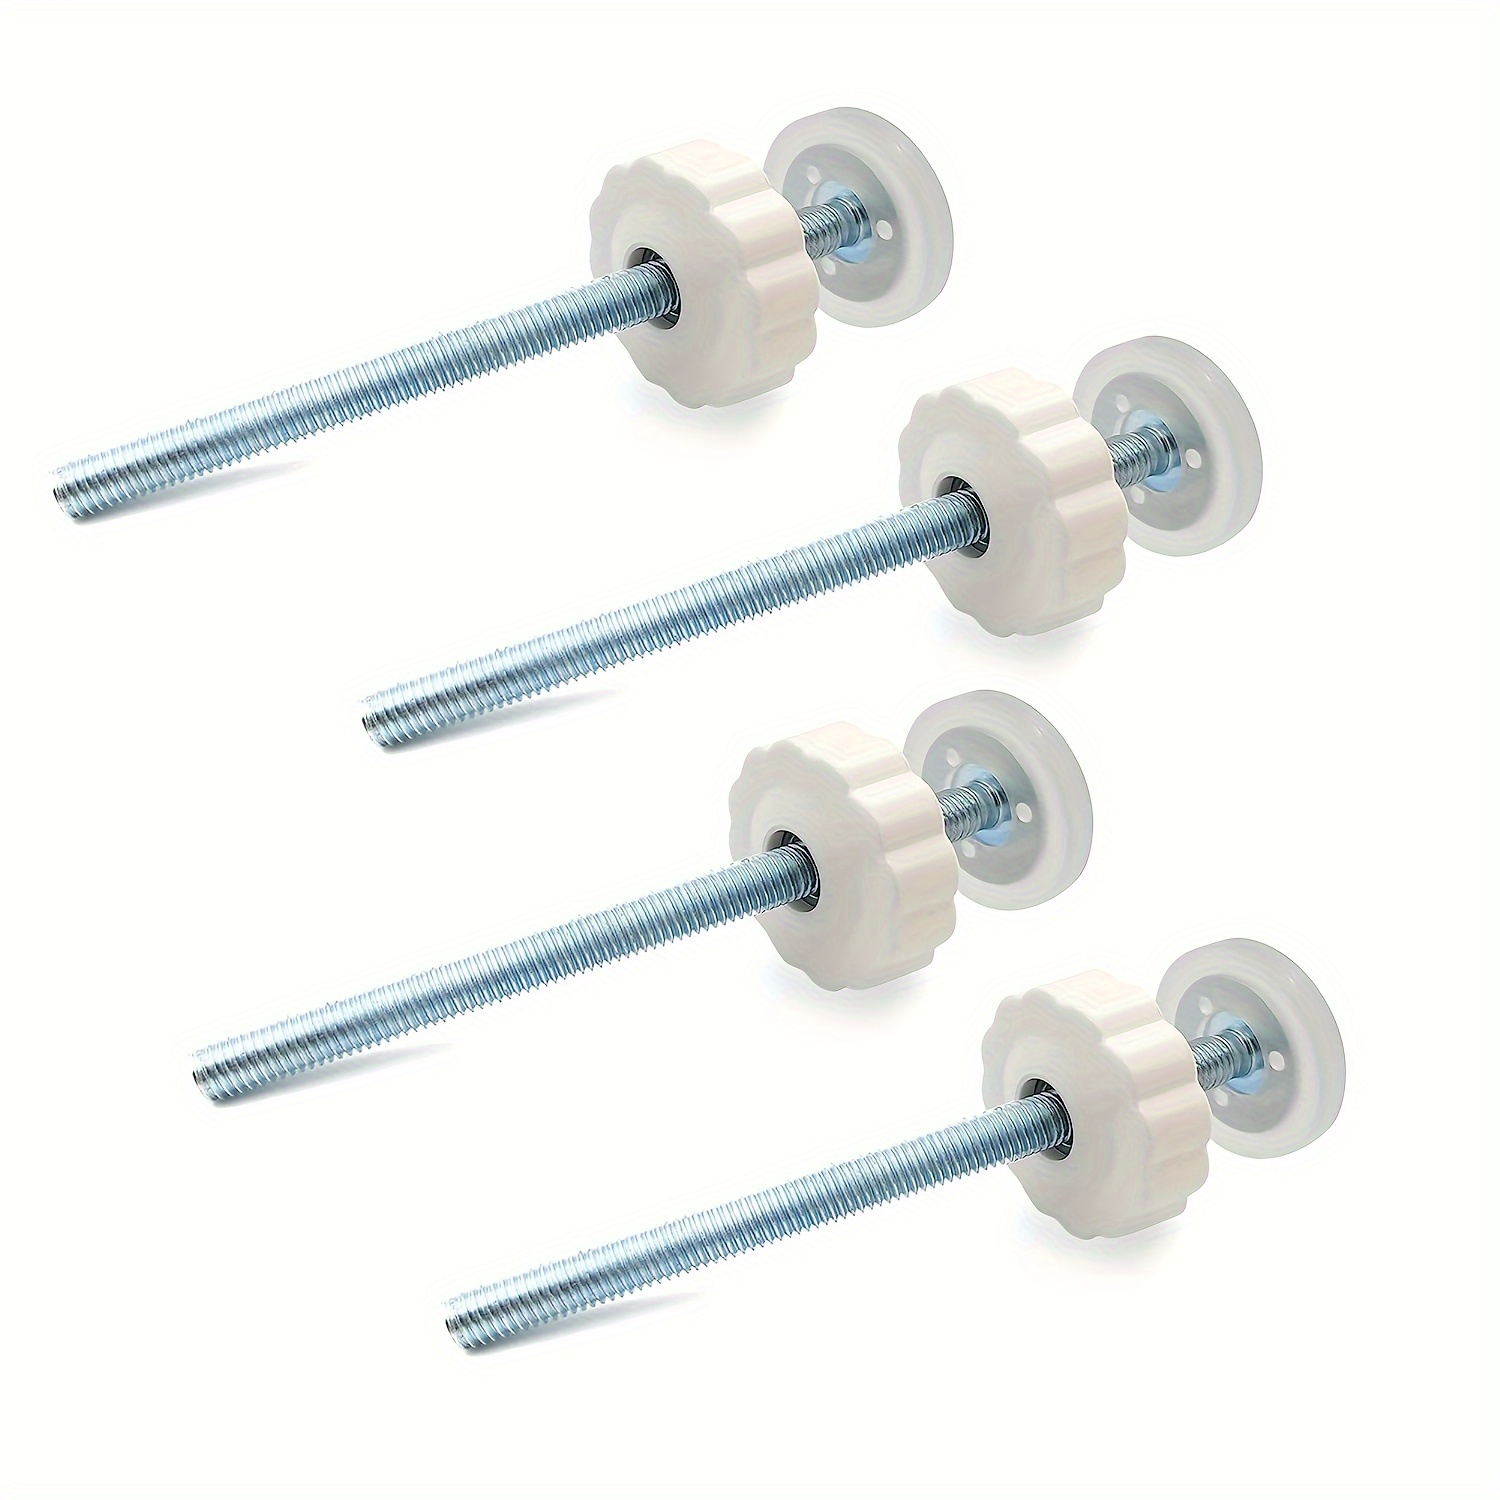 

4pcs, Gate Threaded Spindle Rods, M8 (8mm) Replacement Bolt Part For Pressure Mounted Safety Gates, Long Gate Extender